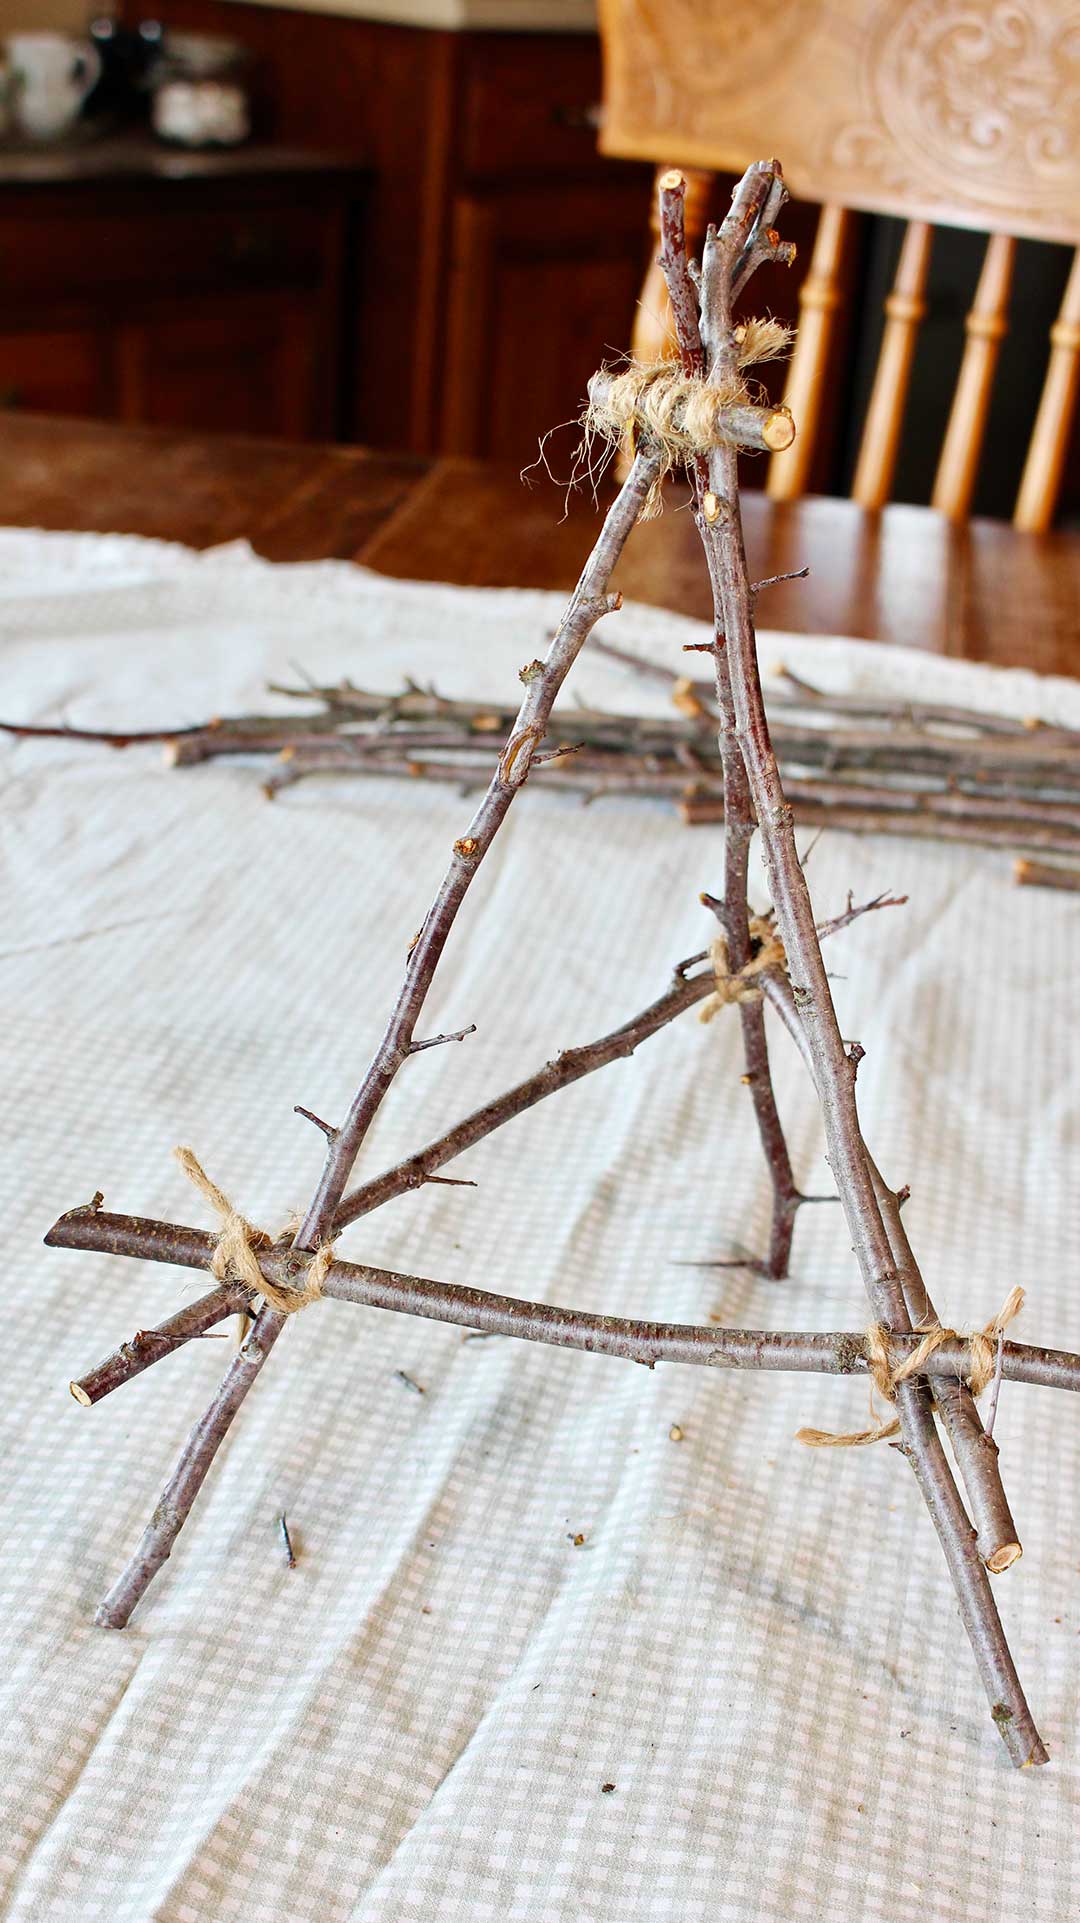 Completed tabletop easel from twigs sitting on a kitchen table draped with a piece of fabric.